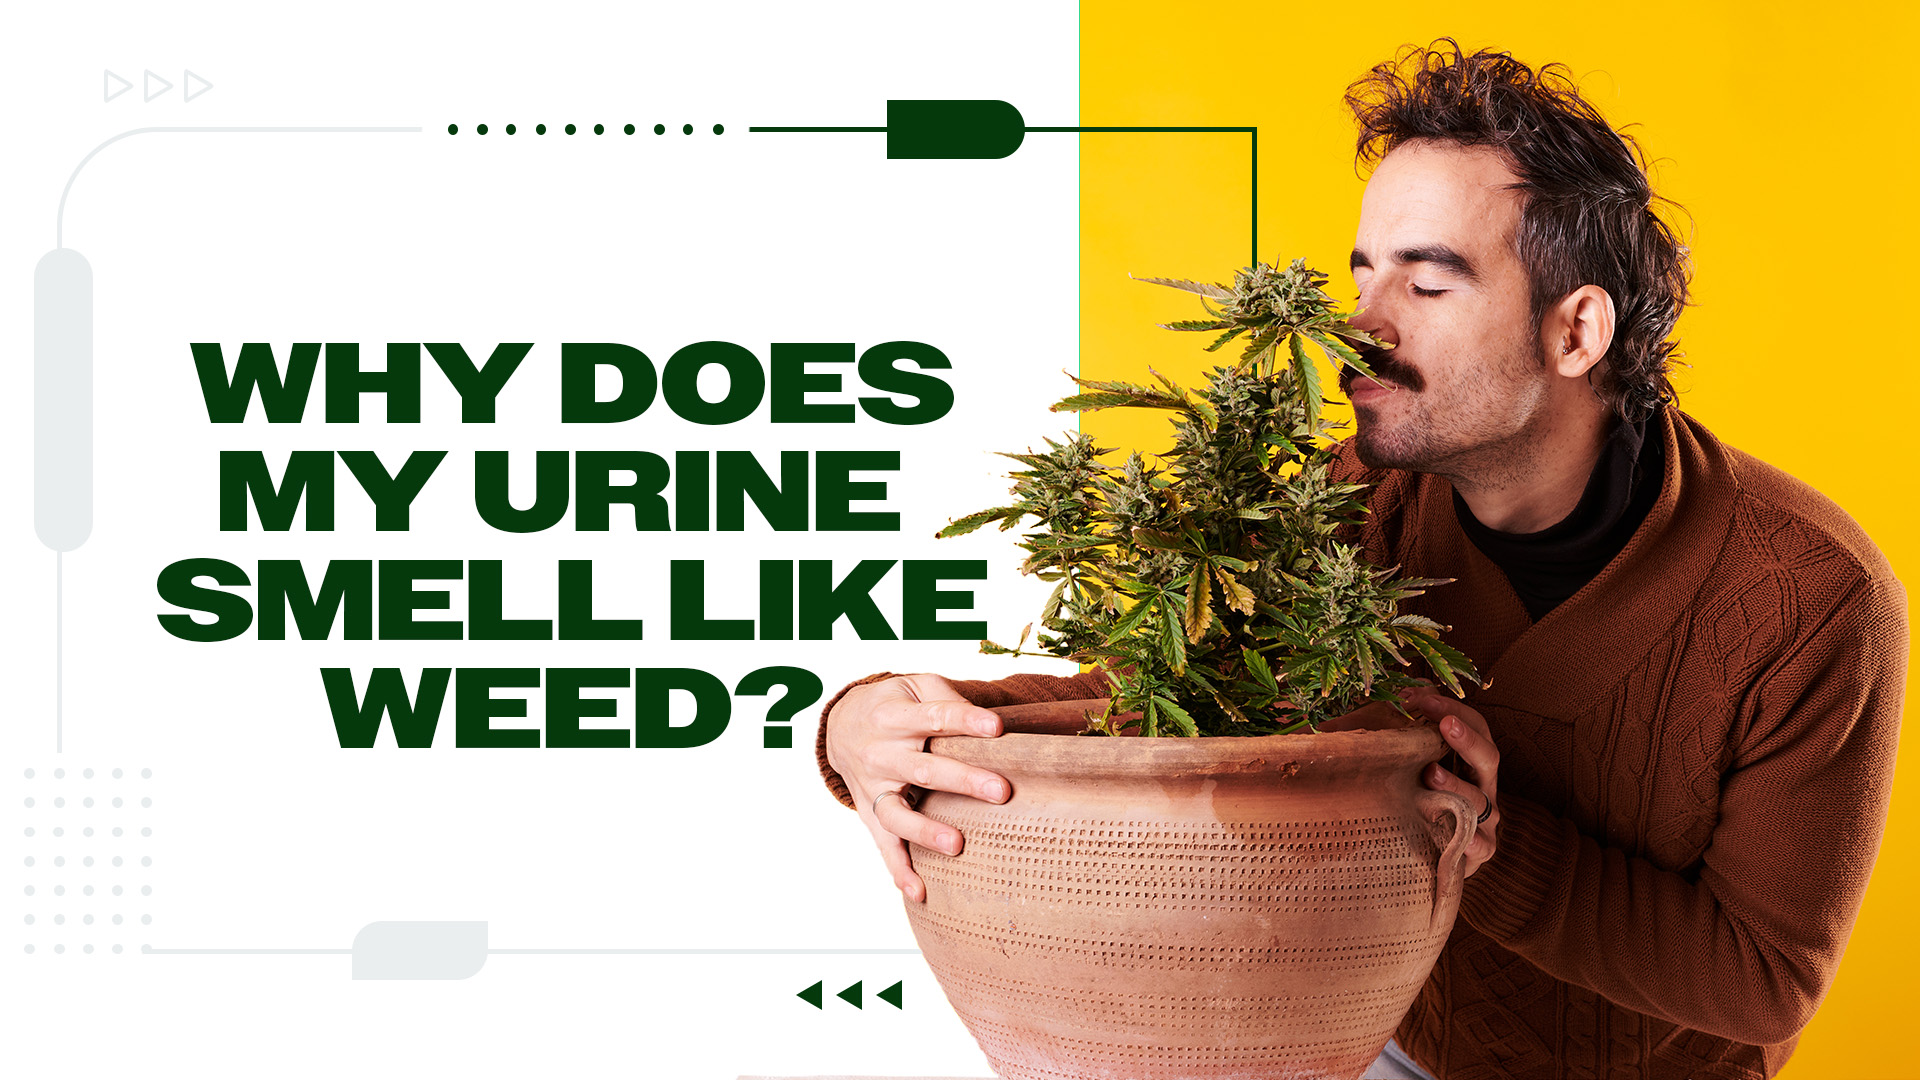 Why Does My Urine Smell Like Weed?